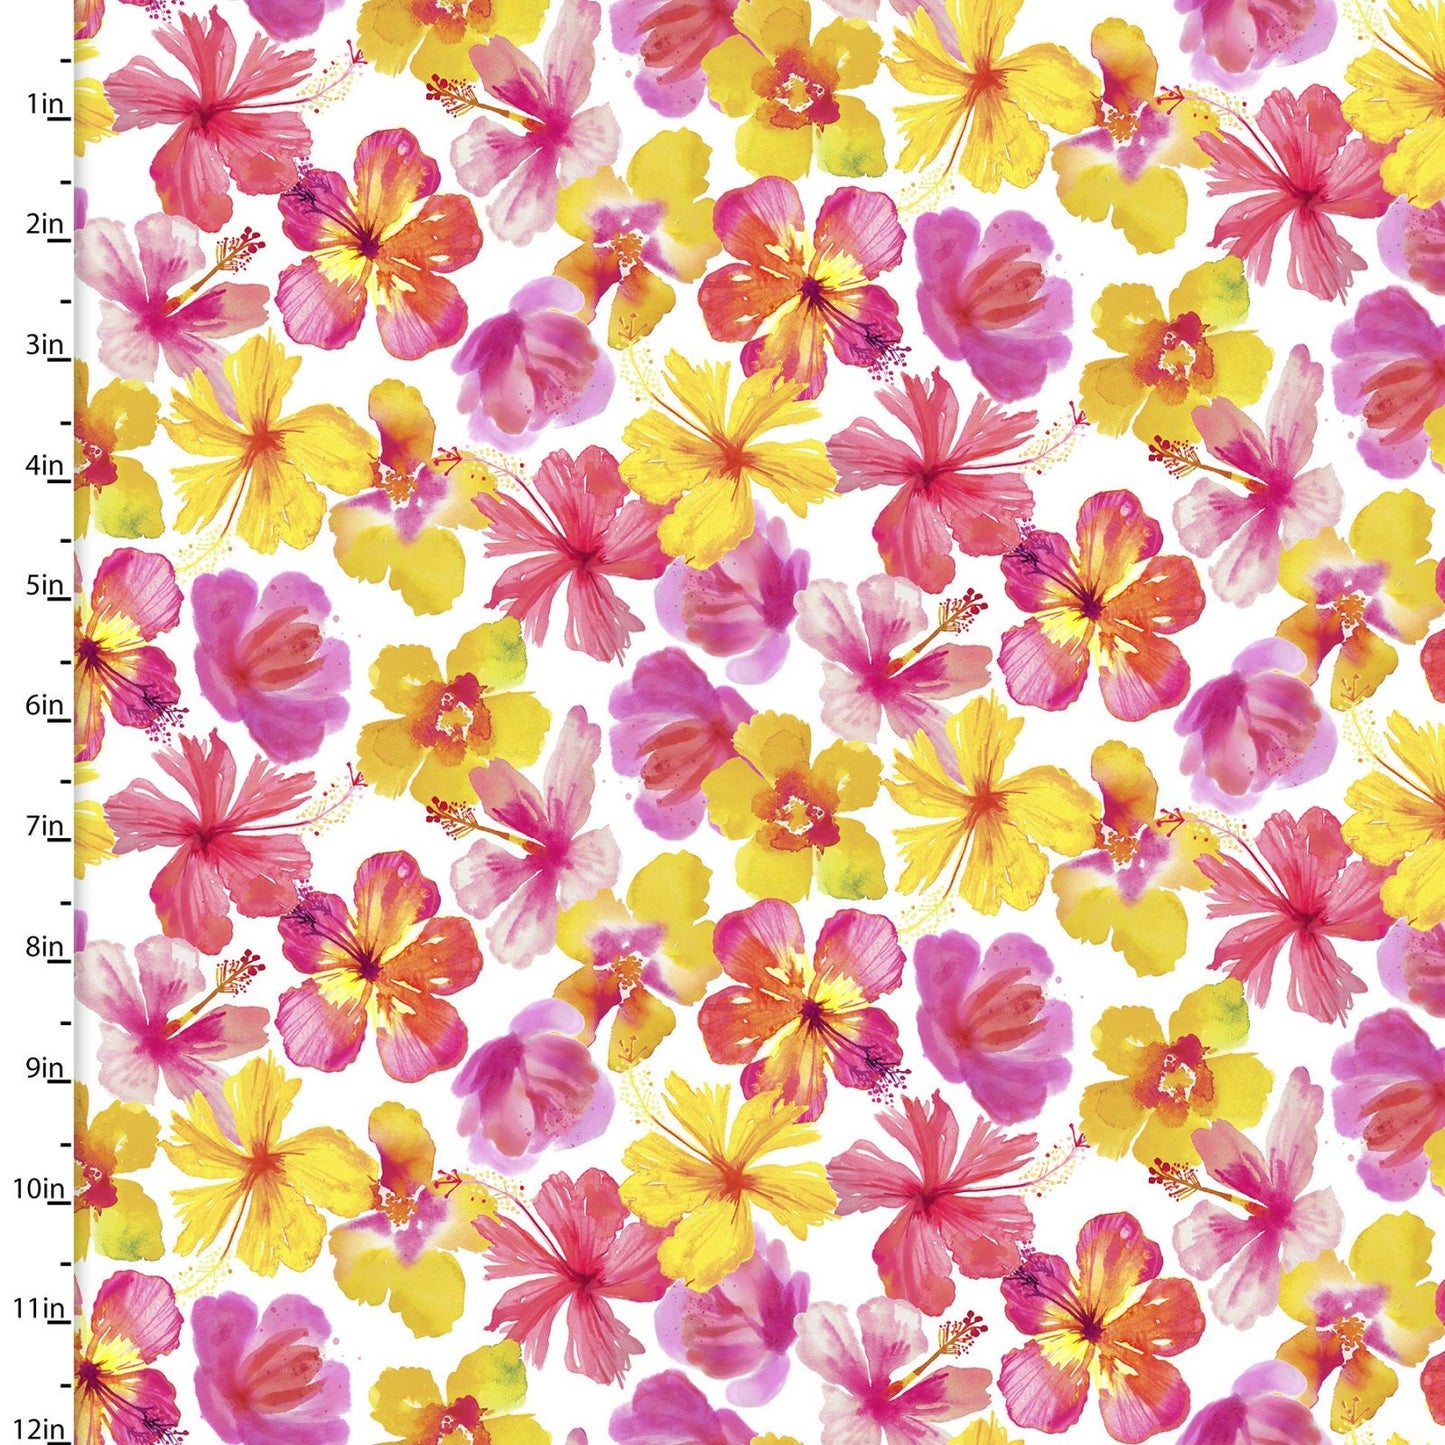 Tropicale Digitally Printed Flowers 13781 Cotton Woven Fabric